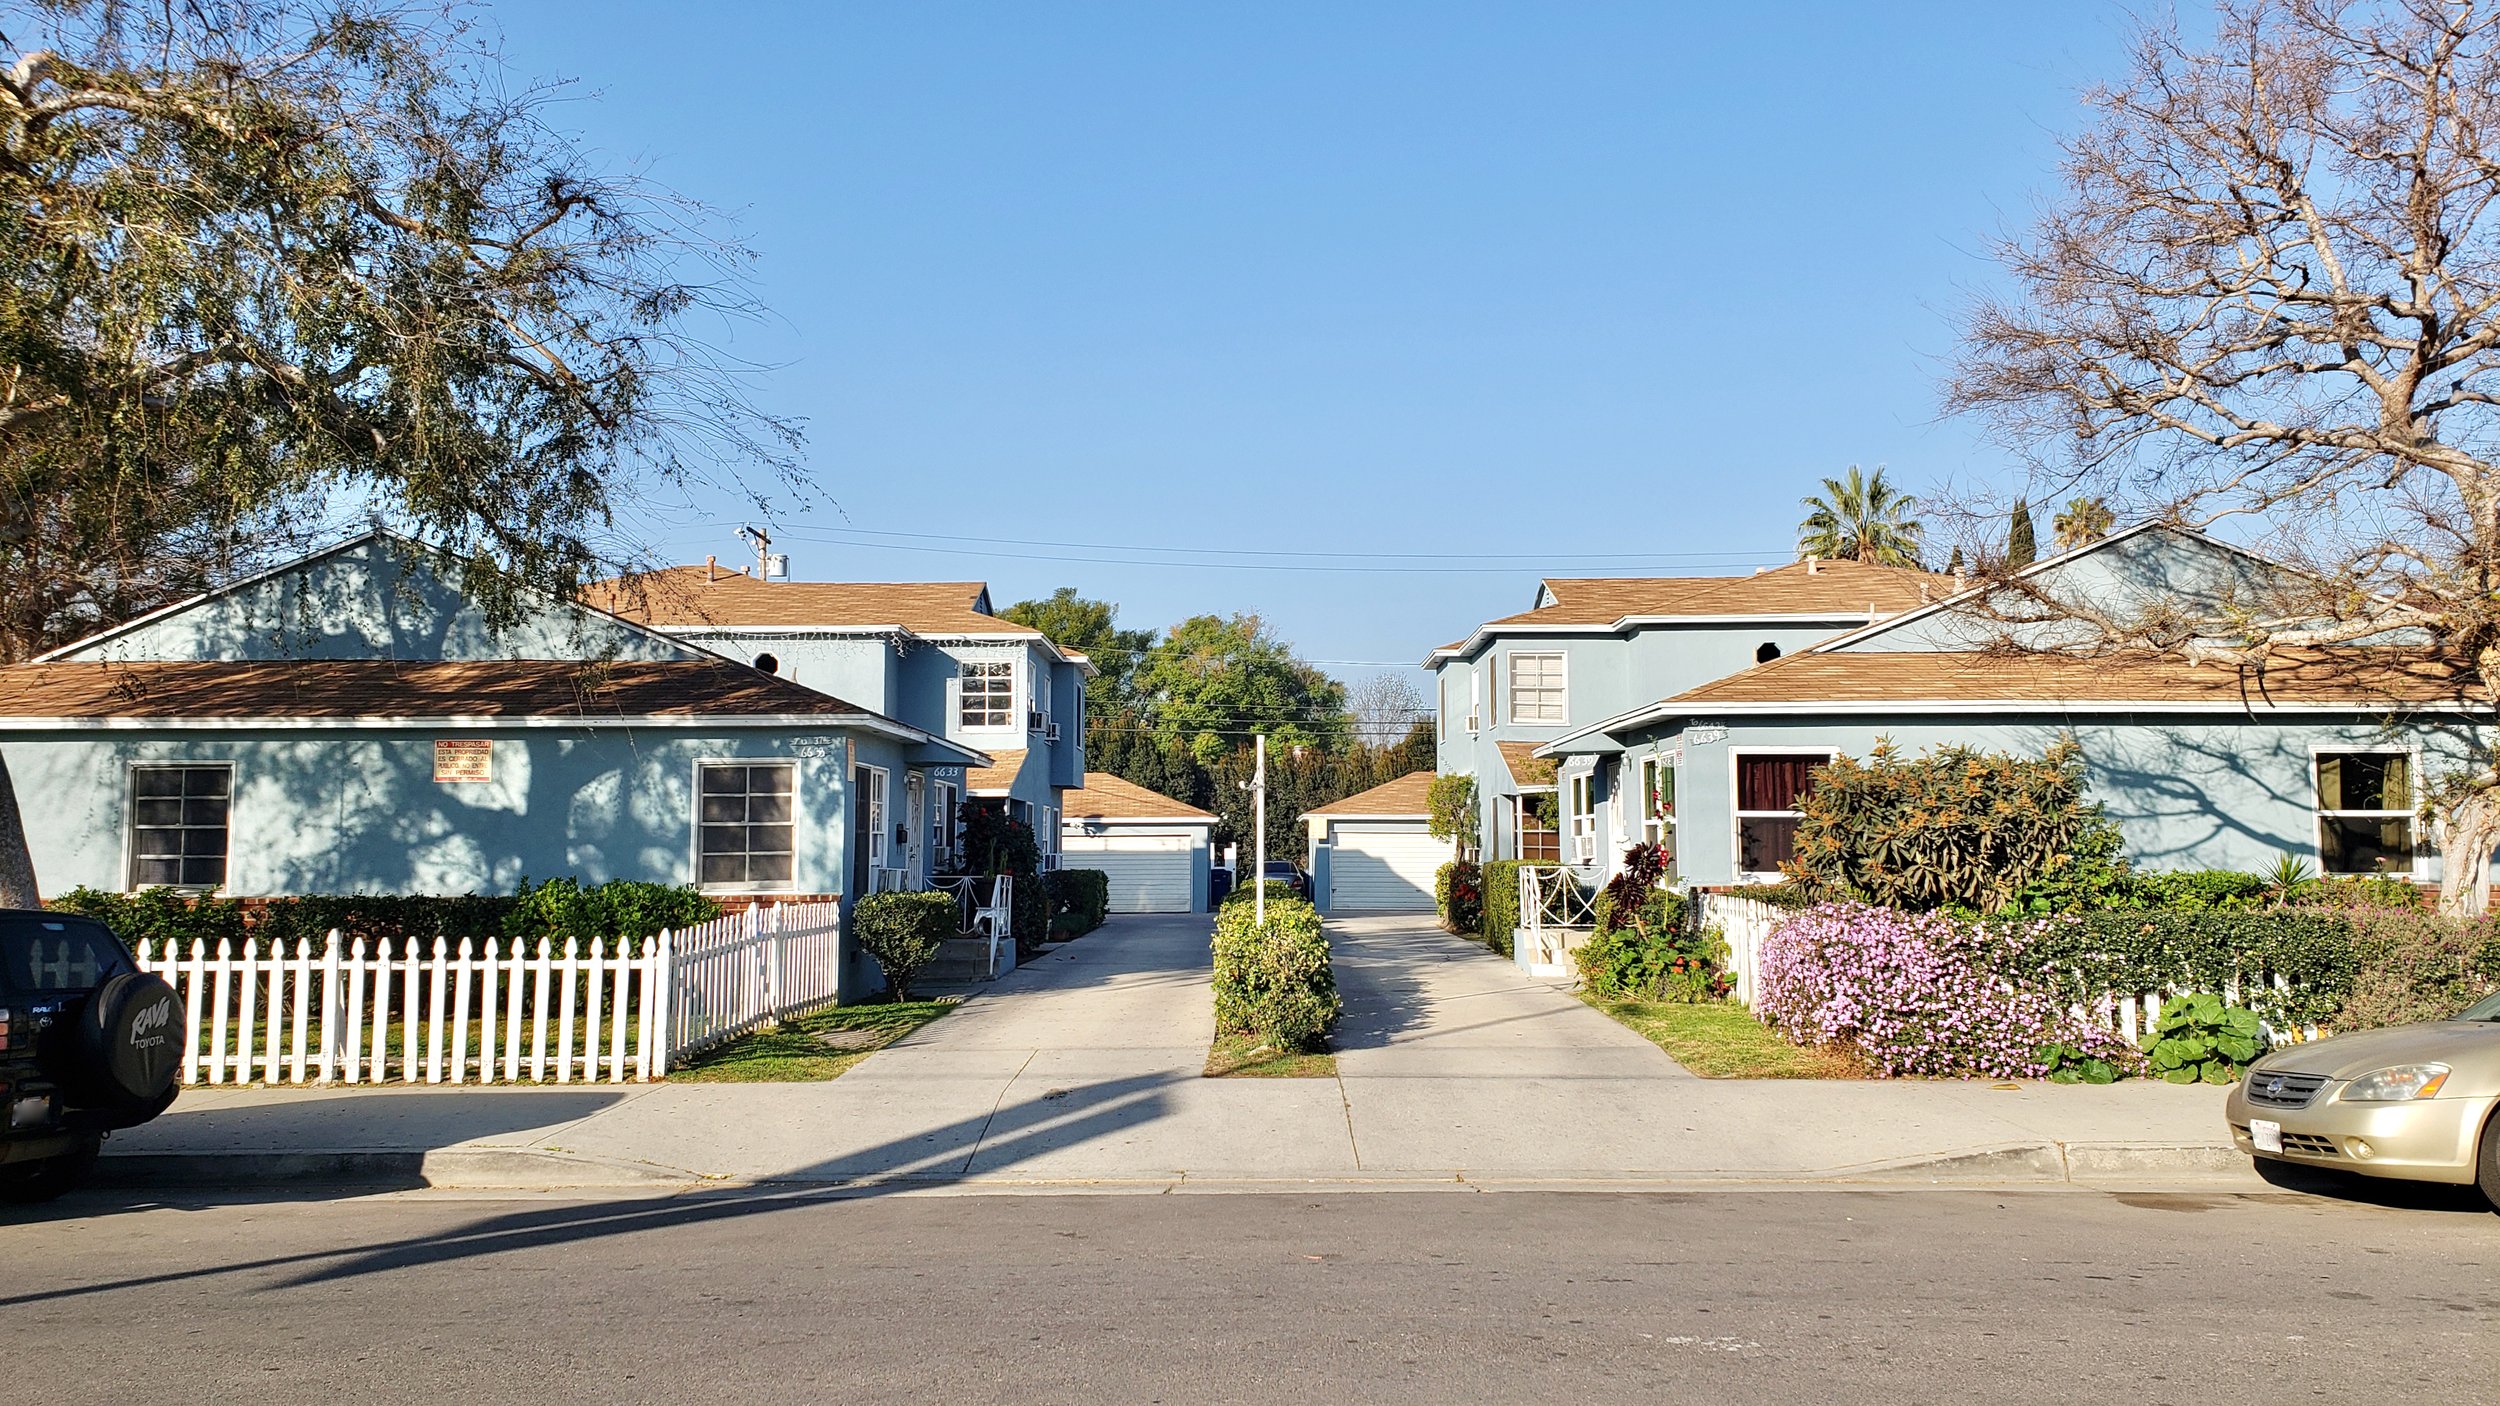 A sunny street view showing quaint houses with driveways and a white picket fence.